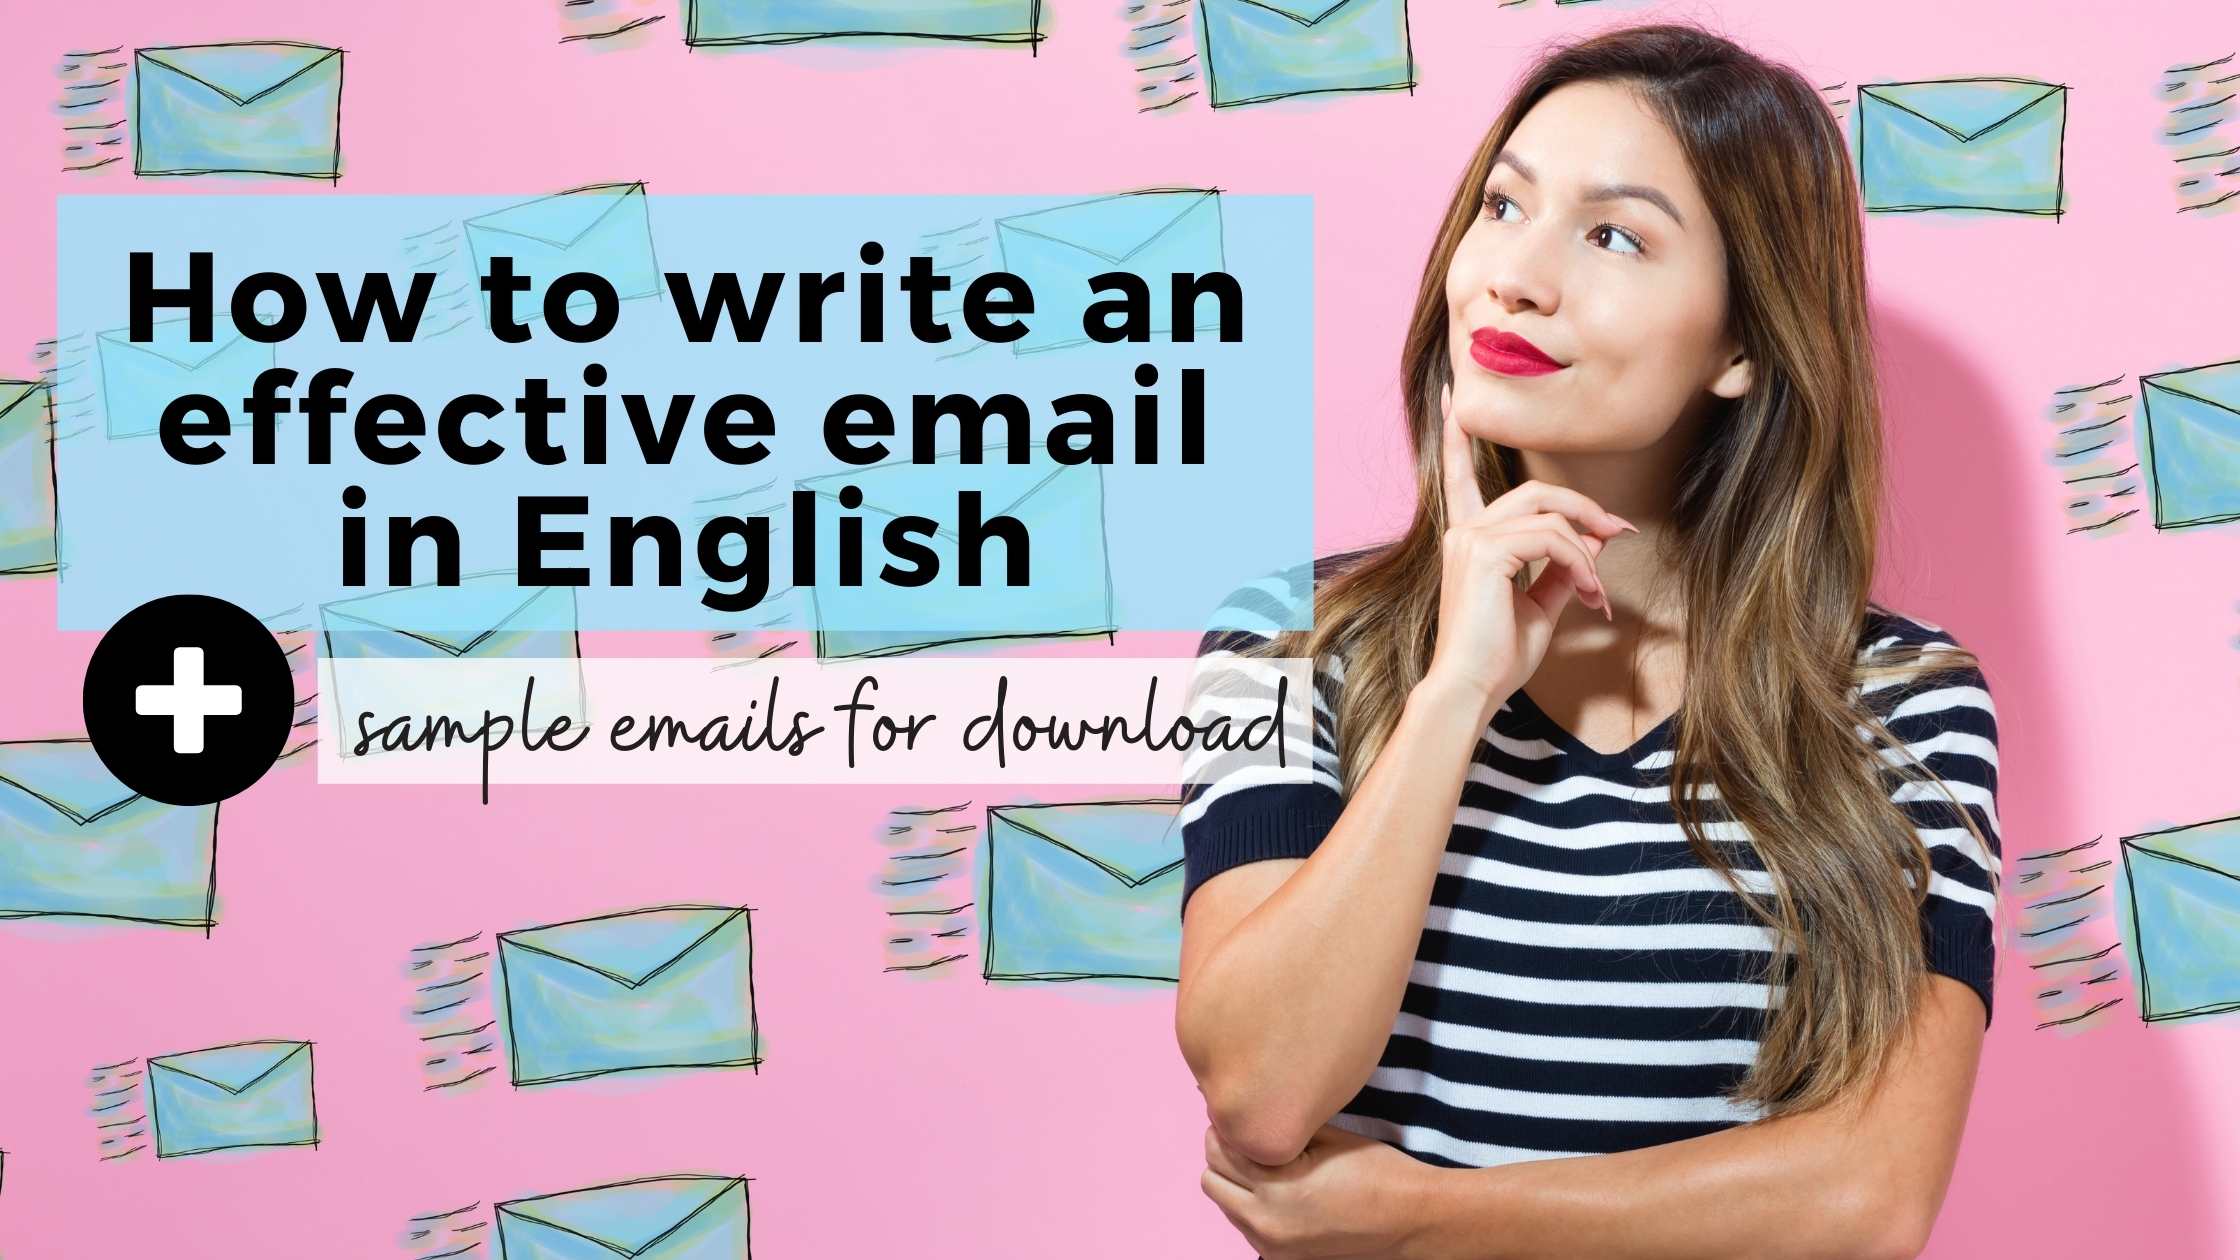 Writing Emails in English - English Learn Site